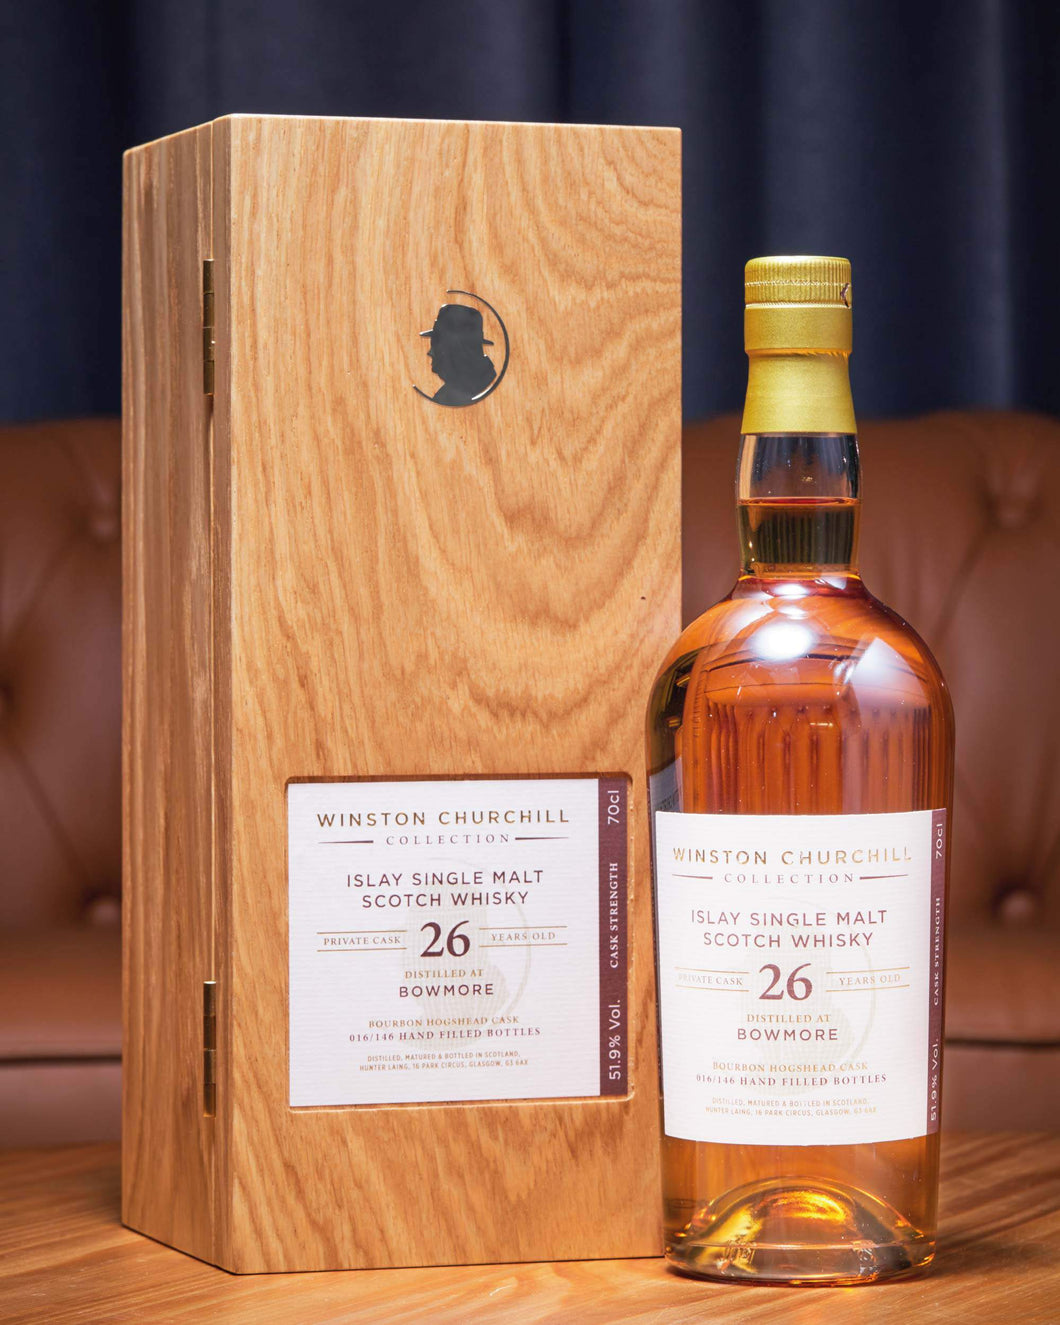 Bowmore Winston Churchill Collection 26 Years Old 1995 Islay Single Malt Scotch Whisky